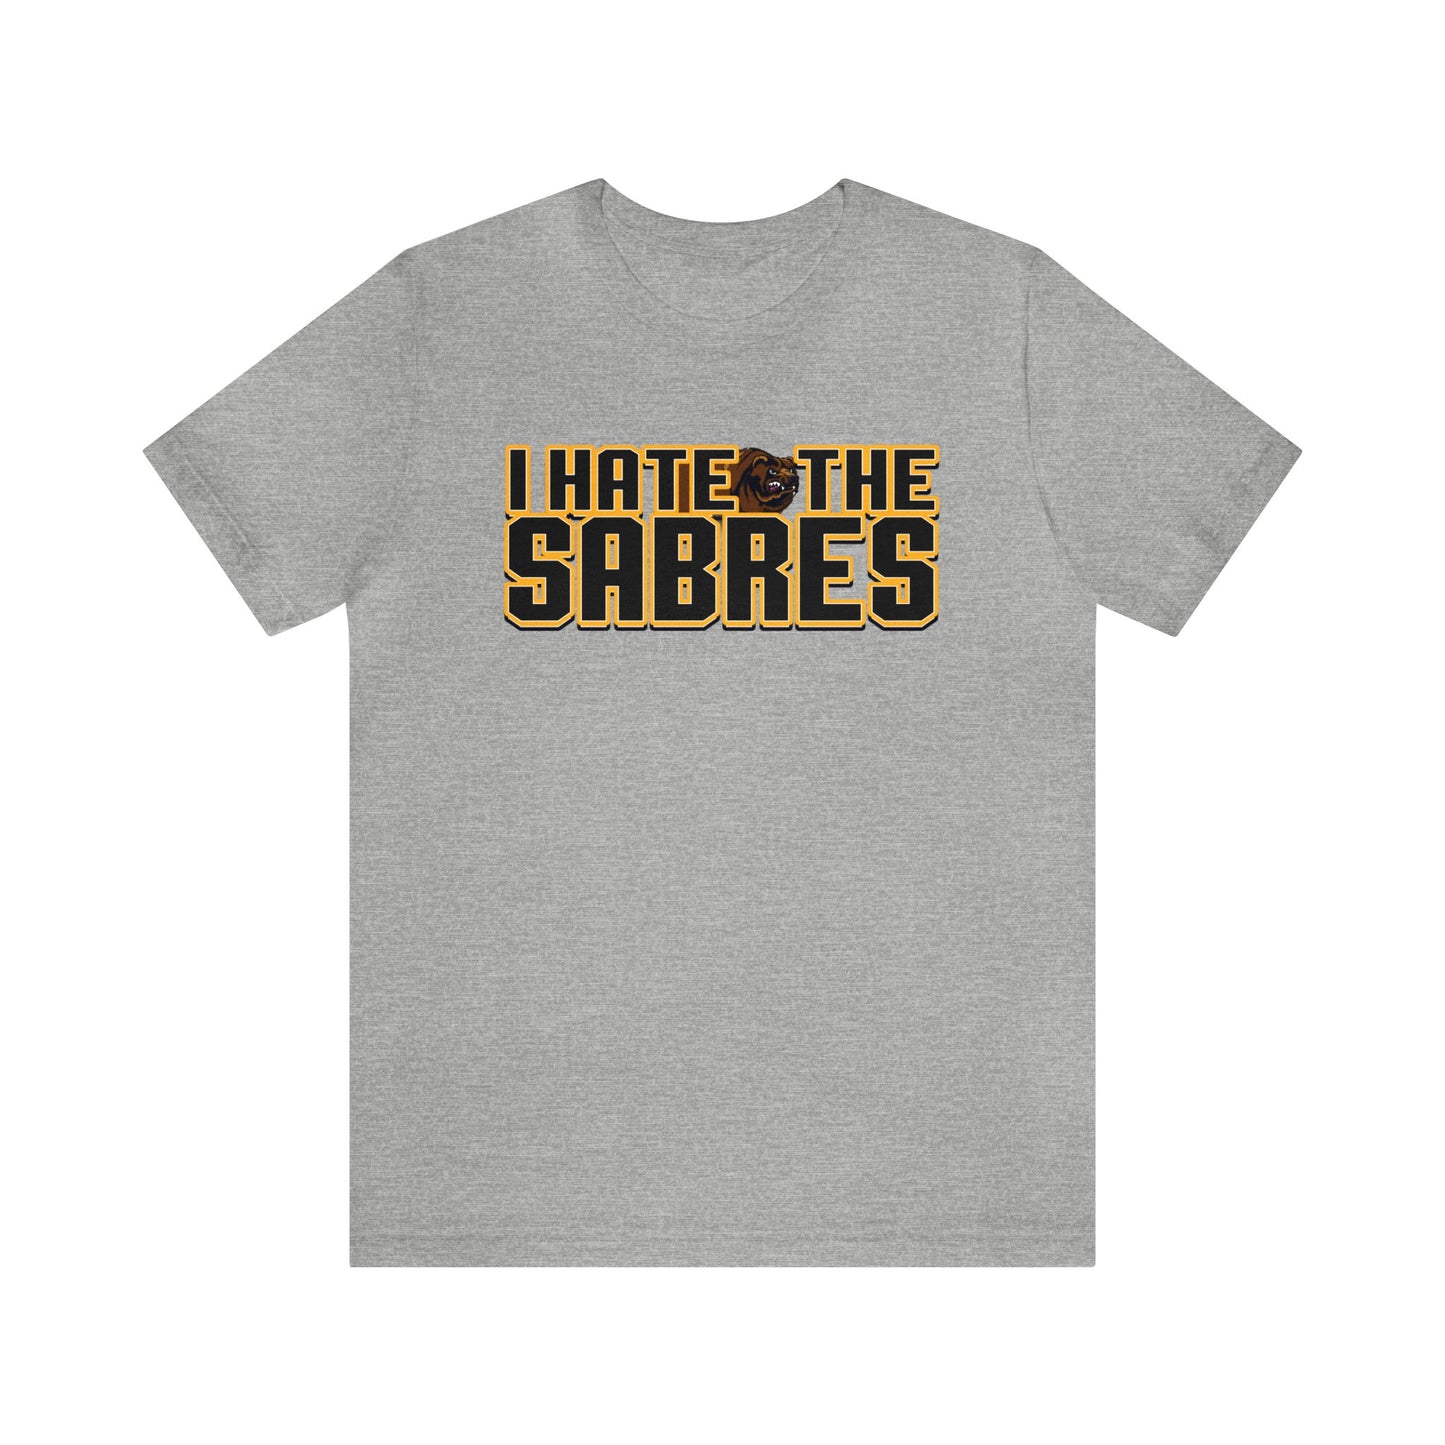 I Hate Saybers (for Boston fans) - Unisex Jersey Short Sleeve Tee